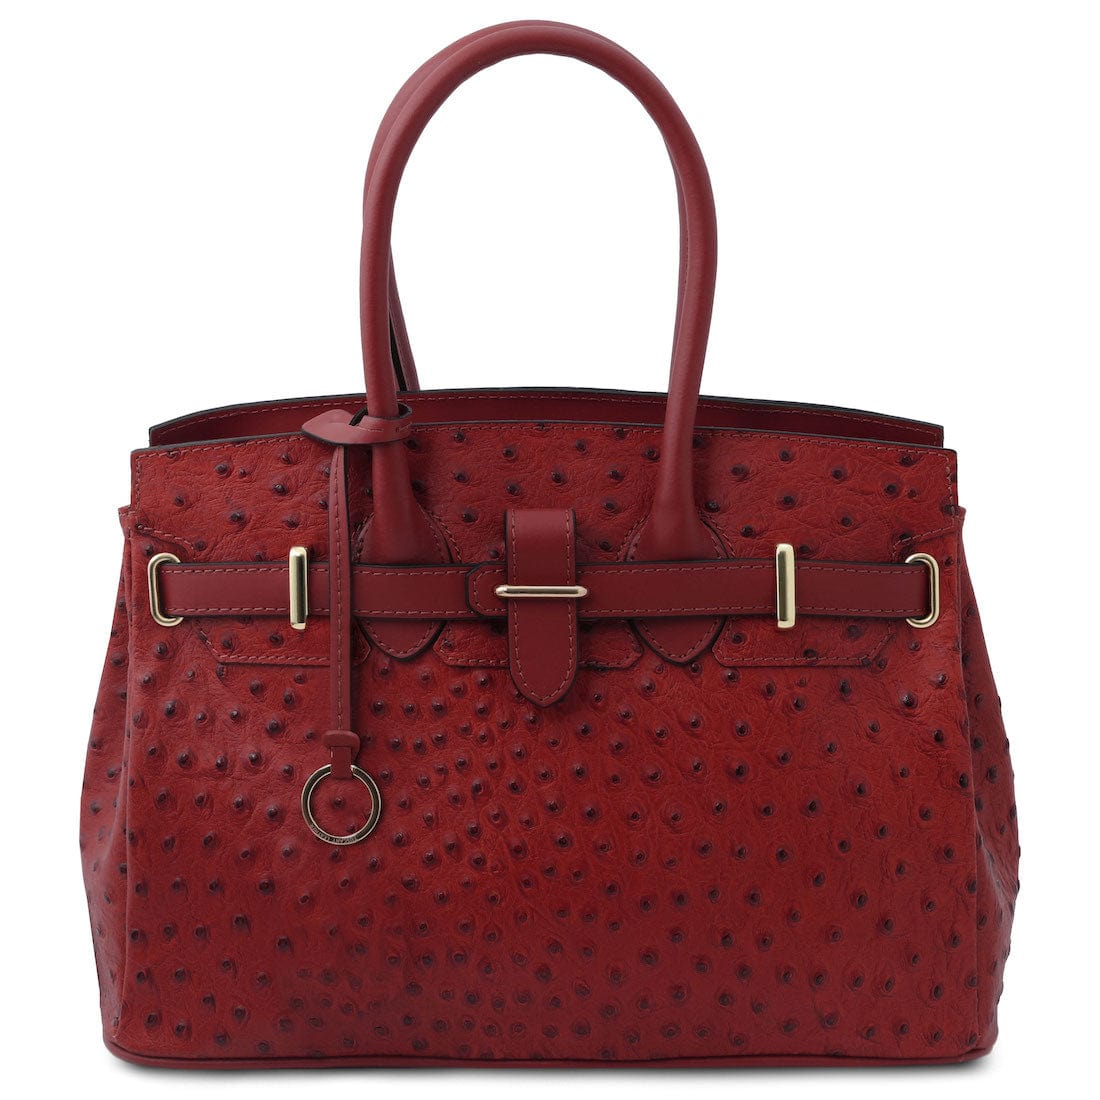 Red Feather Print Patent Italian Leather Bag - Schandra